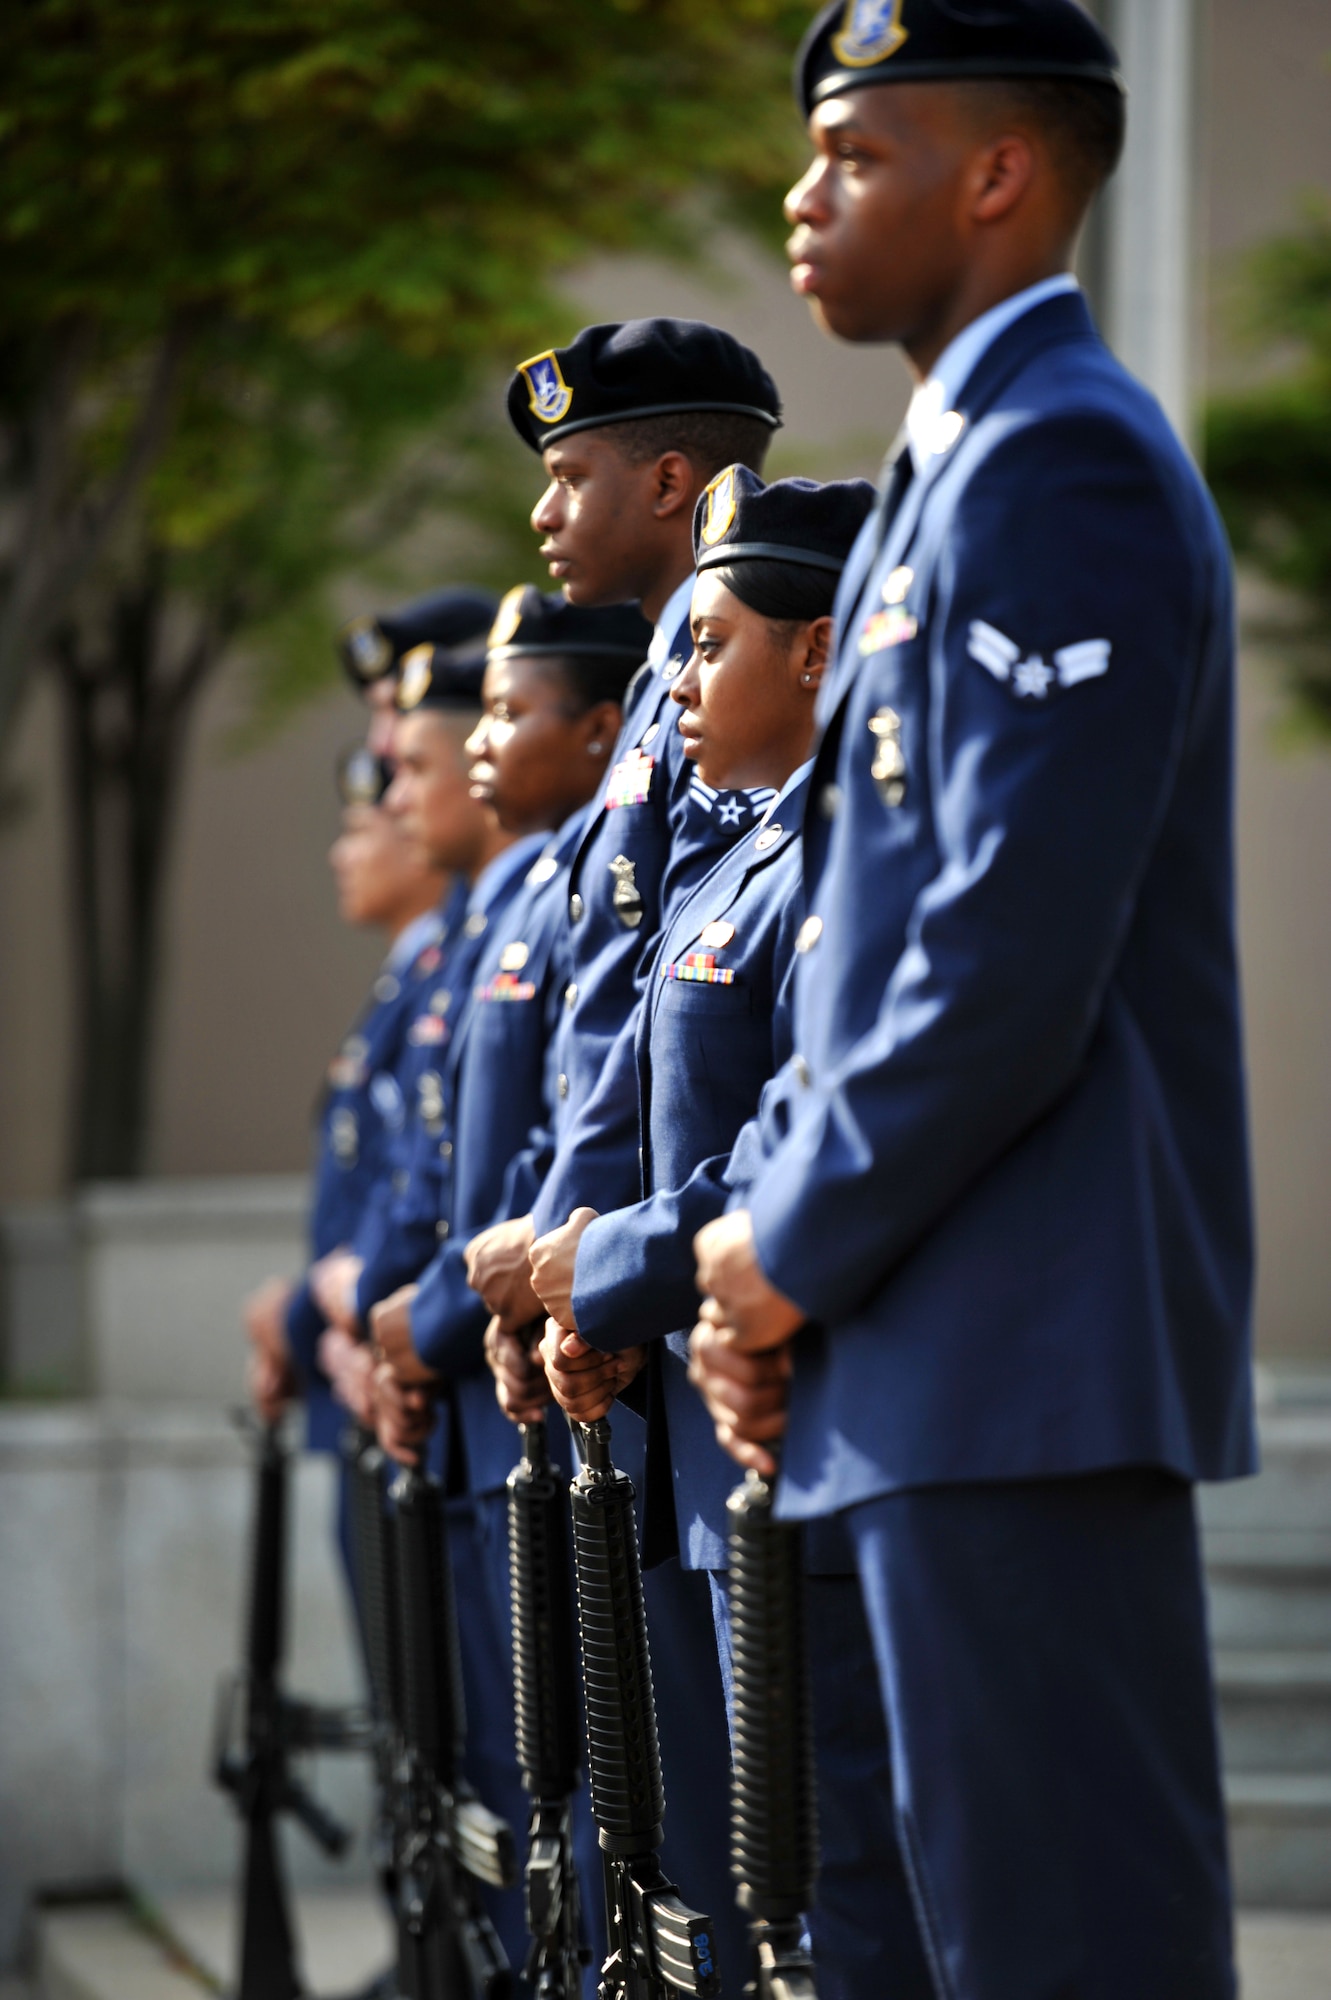 Members of the 51st Security Forces Squadron rifle team standby before rendering a 21-gun salute during a retreat ceremony held to honor fallen defenders and Office of Special Investigations agents at Osan Air Base, Republic of Korea, May 13, 2013. The ceremony kicked off an annual week-long observance that honors the memory and sacrifices made by individuals in the security forces and Office of Special Investigations career fields. (U.S. Air Force photo/Staff Sgt. Emerson Nuñez)